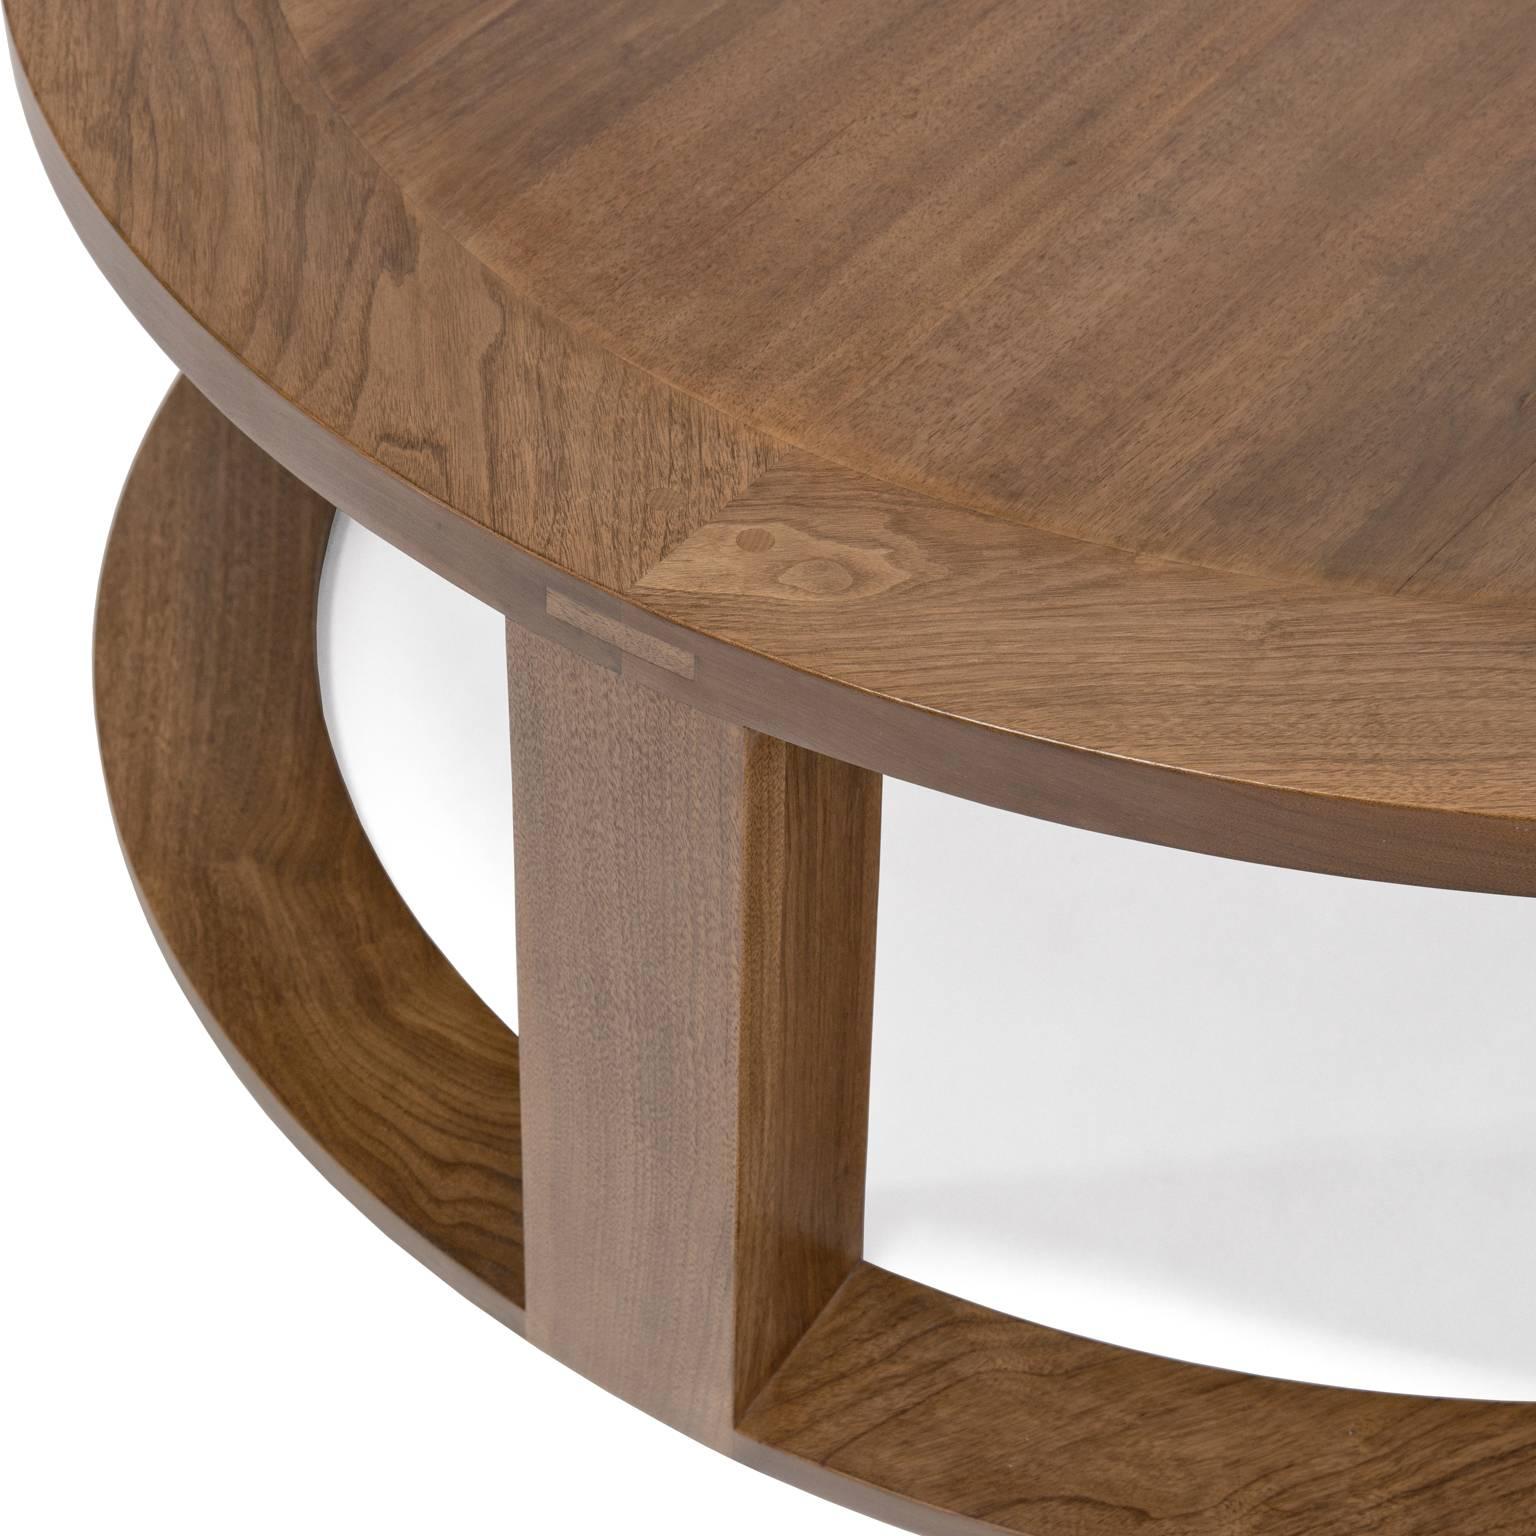 Atelier Demiurge collection round quarter radius coffee table shown with inset 19th century walnut planks in sandy finish. Inquire for finish and customization options.

Dimensions:
48 D X 16 H.

 